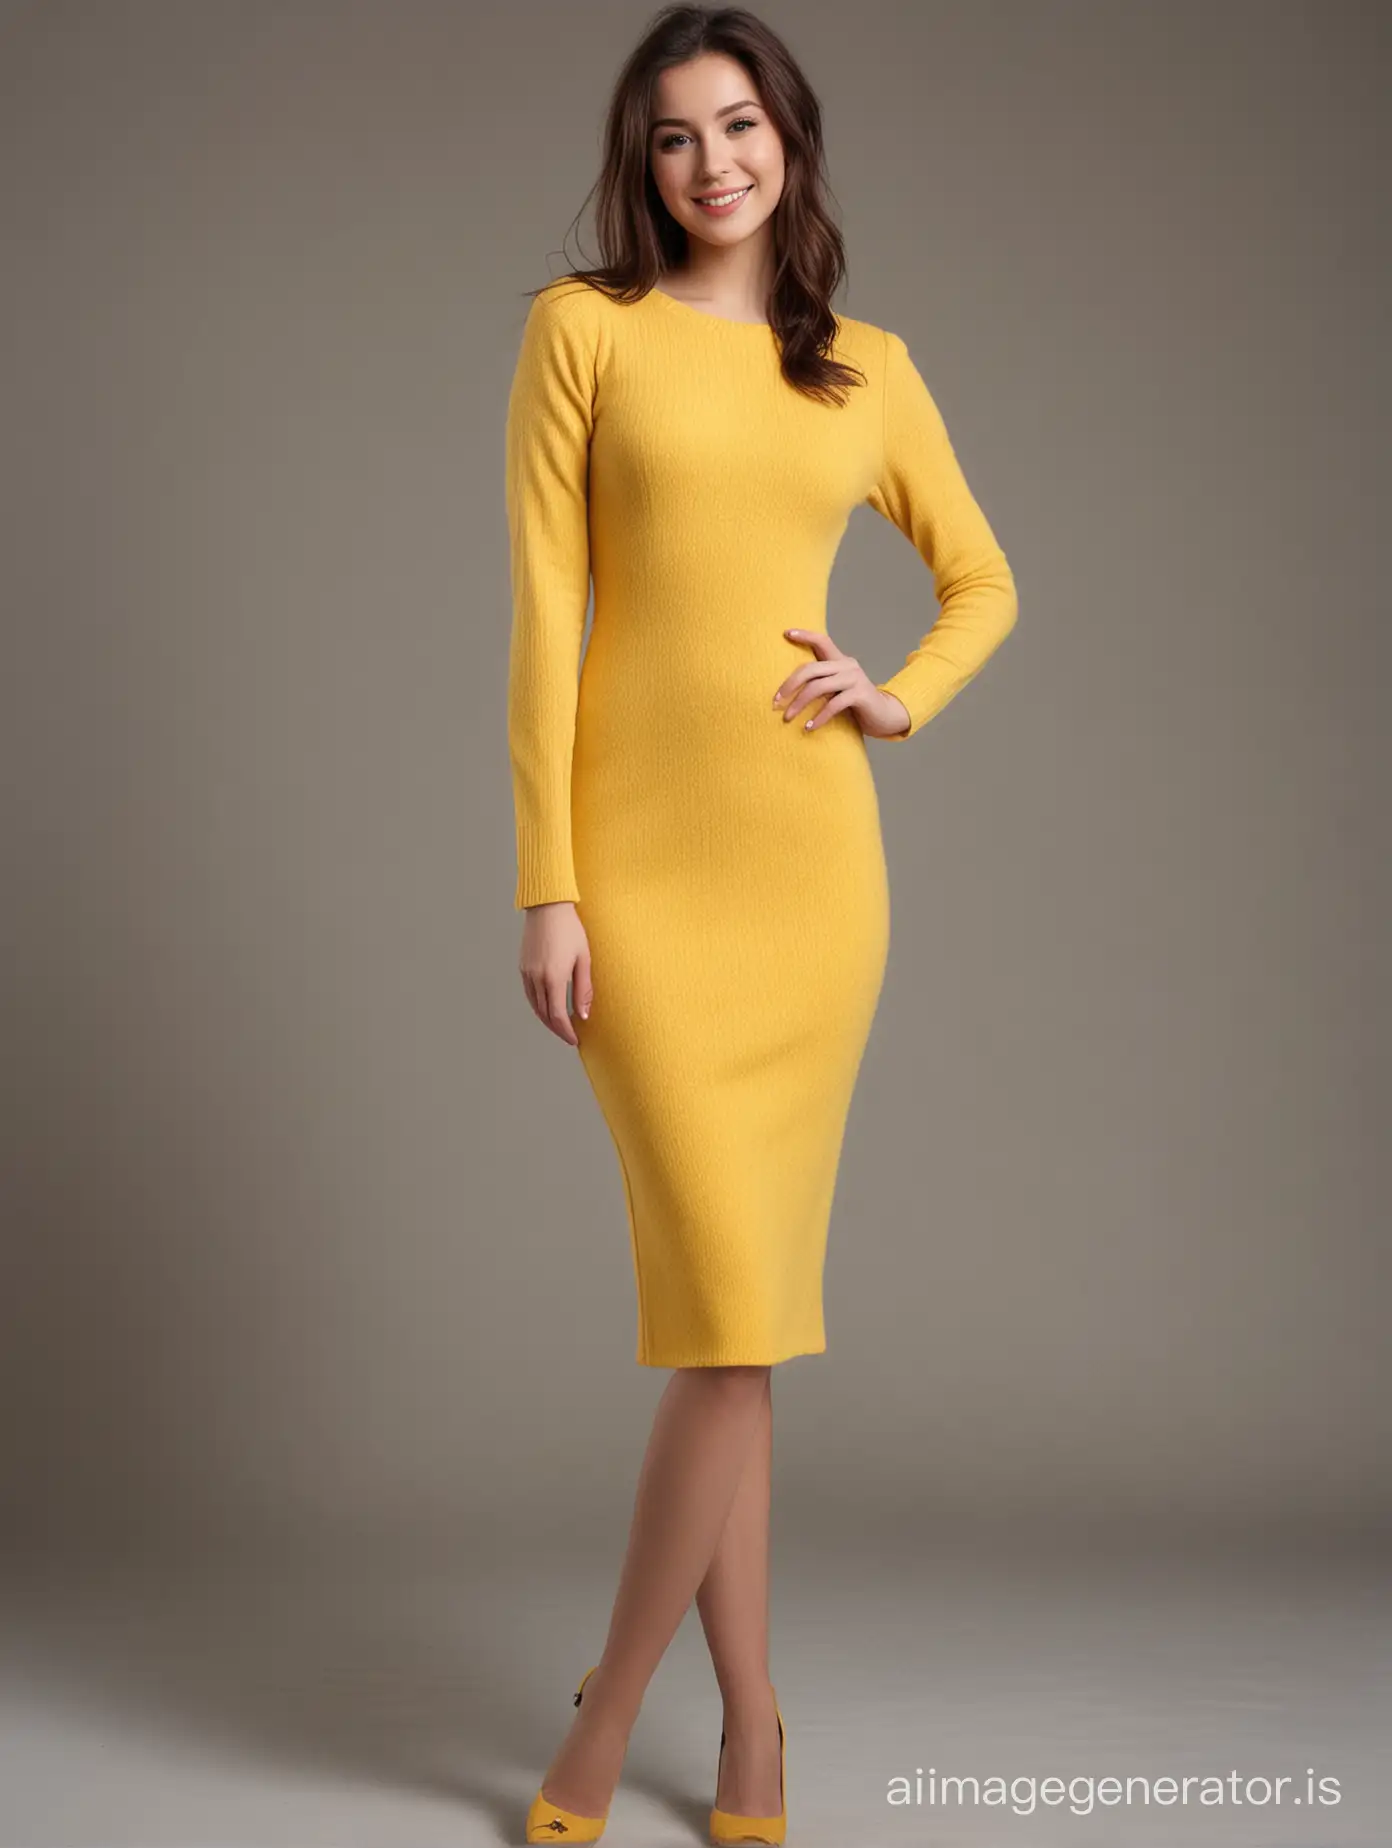 full body shot, full legs,full-length photography,full shot,  full body, full height ,the most beautiful girly in a long pencil dress posing for a picture, a long woolen dress, a yellow dress, outfit photo,  body complet, high detail product photo, attractive girl, fancy ,  cute , smiling seductively, elegant outfit,